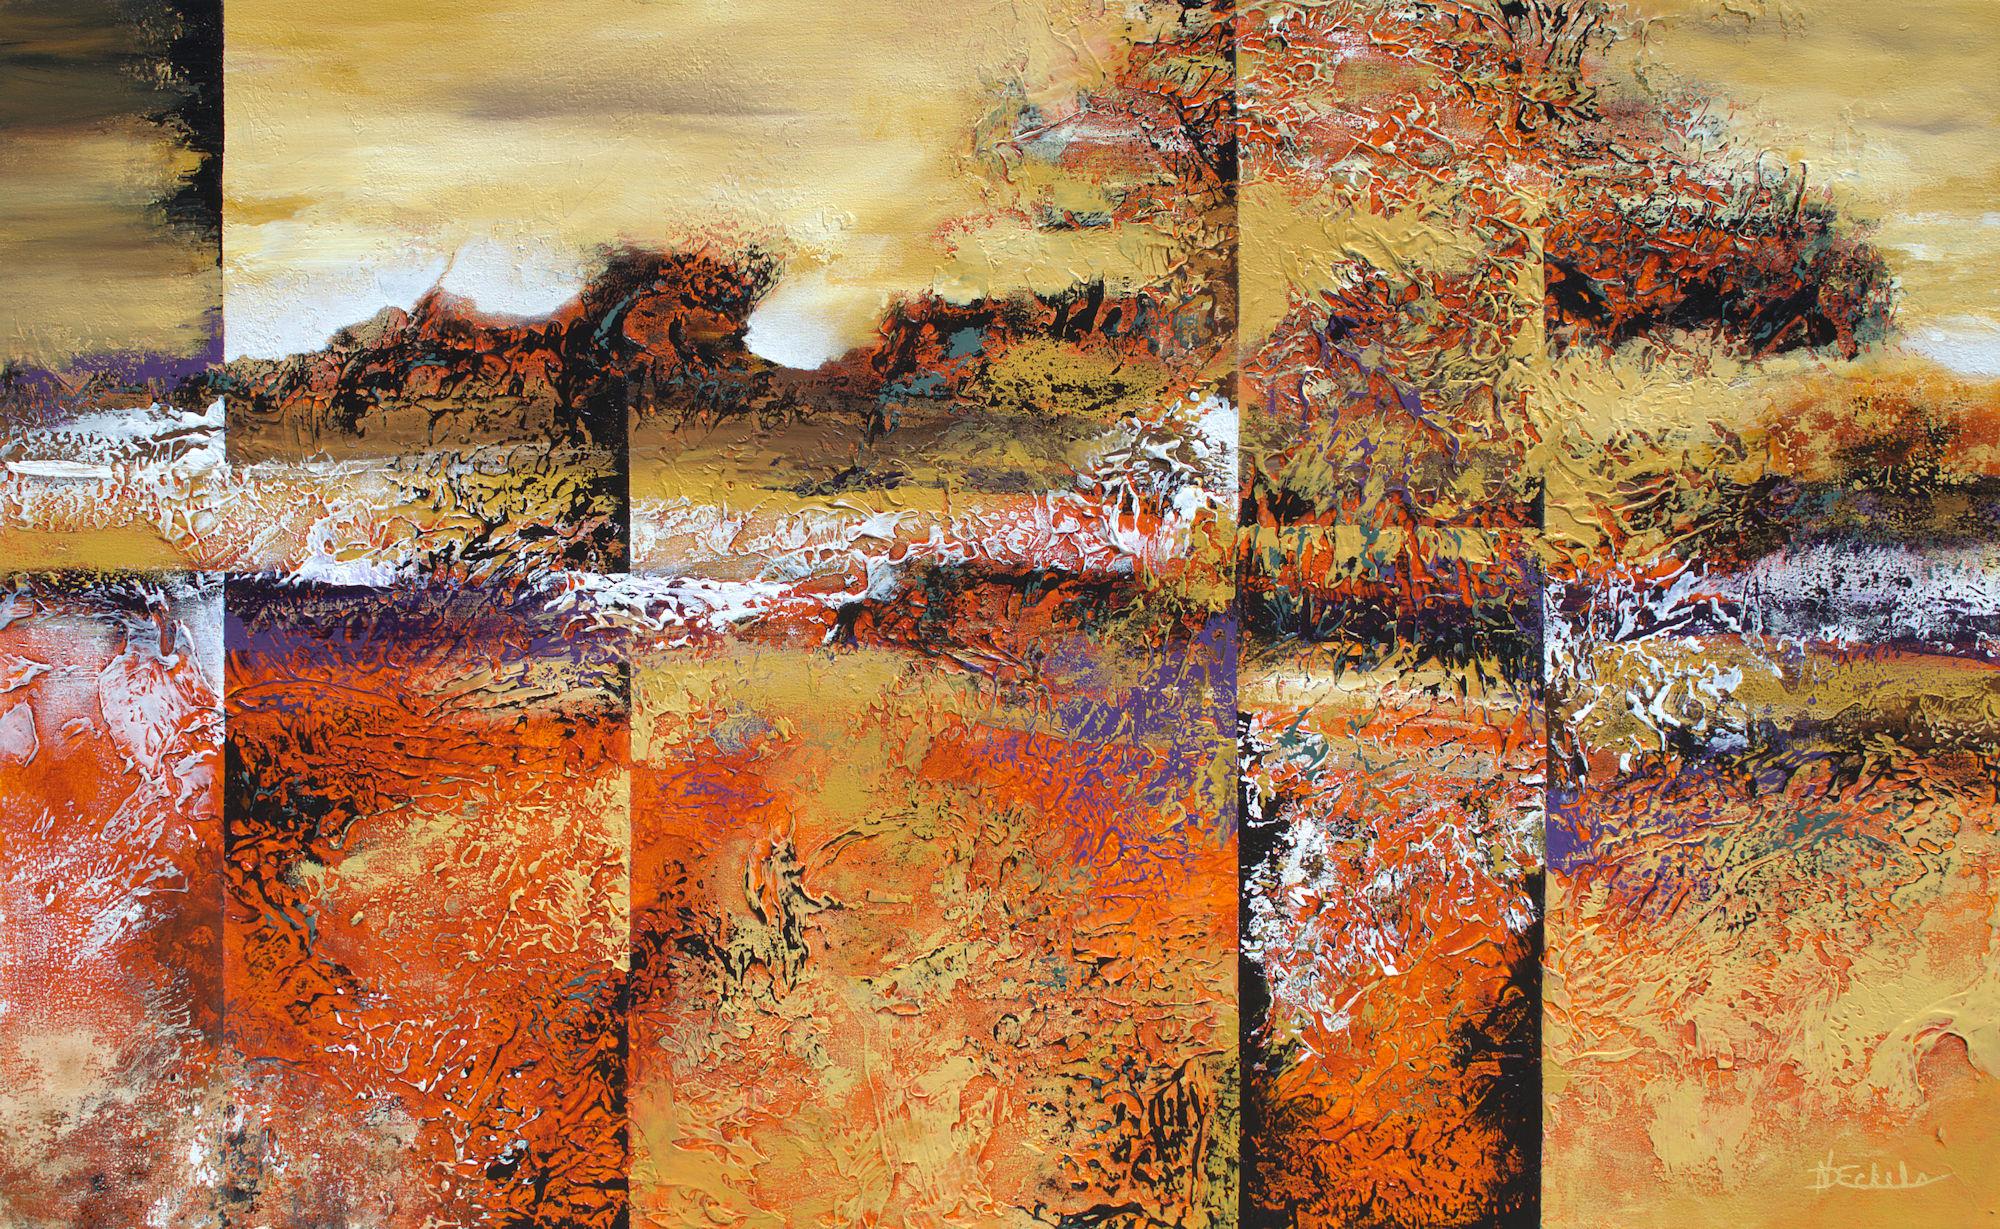 Nancy Eckels Abstract Painting - "Landscape Prism" large abstract painting with textural golds, black and oranges